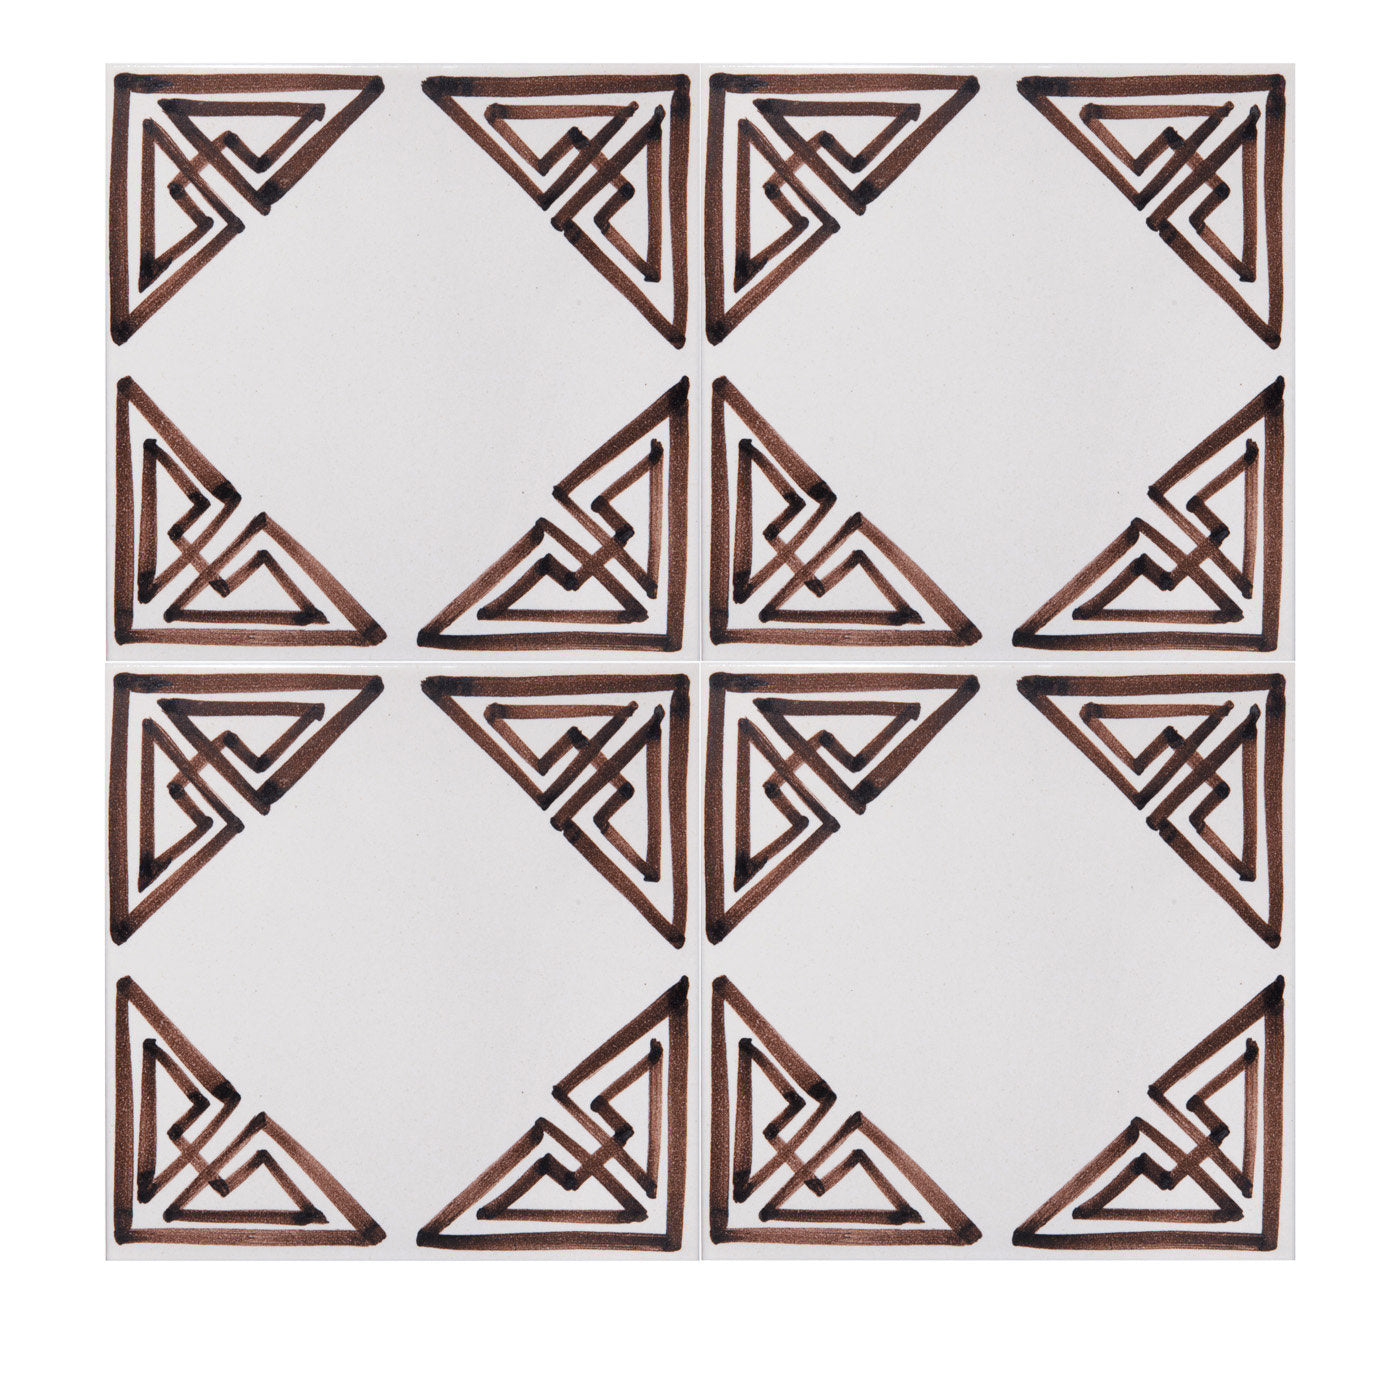 Set of 4 Room Tiles - Main view